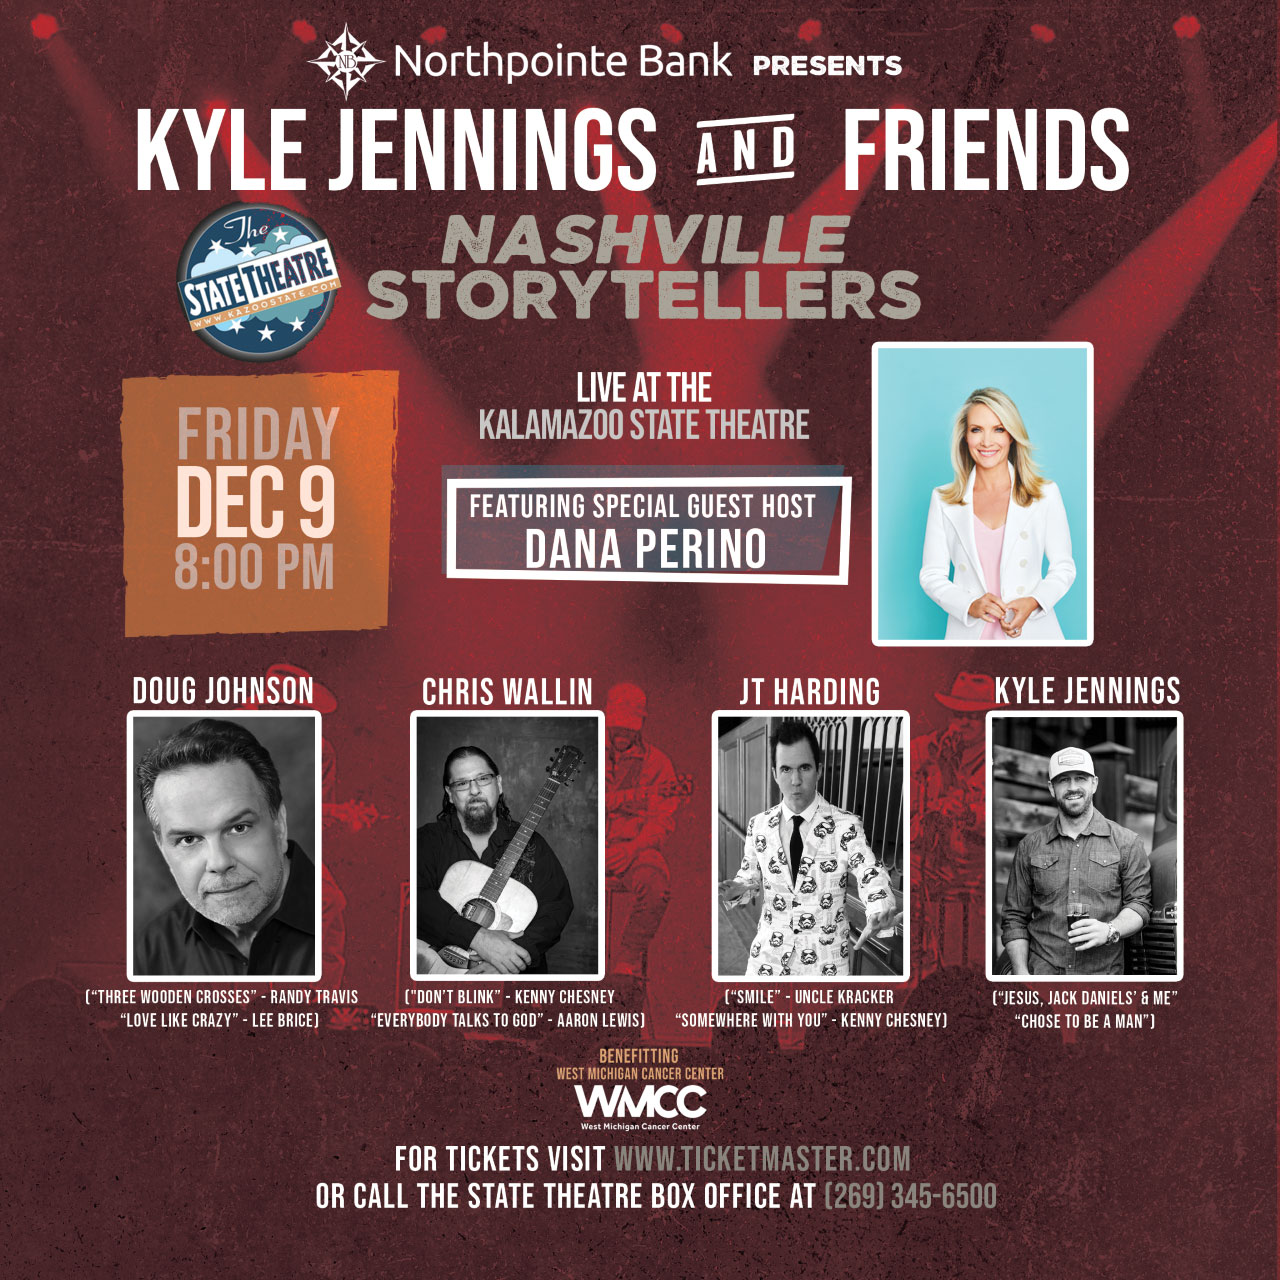 Kyle Jennings and friends